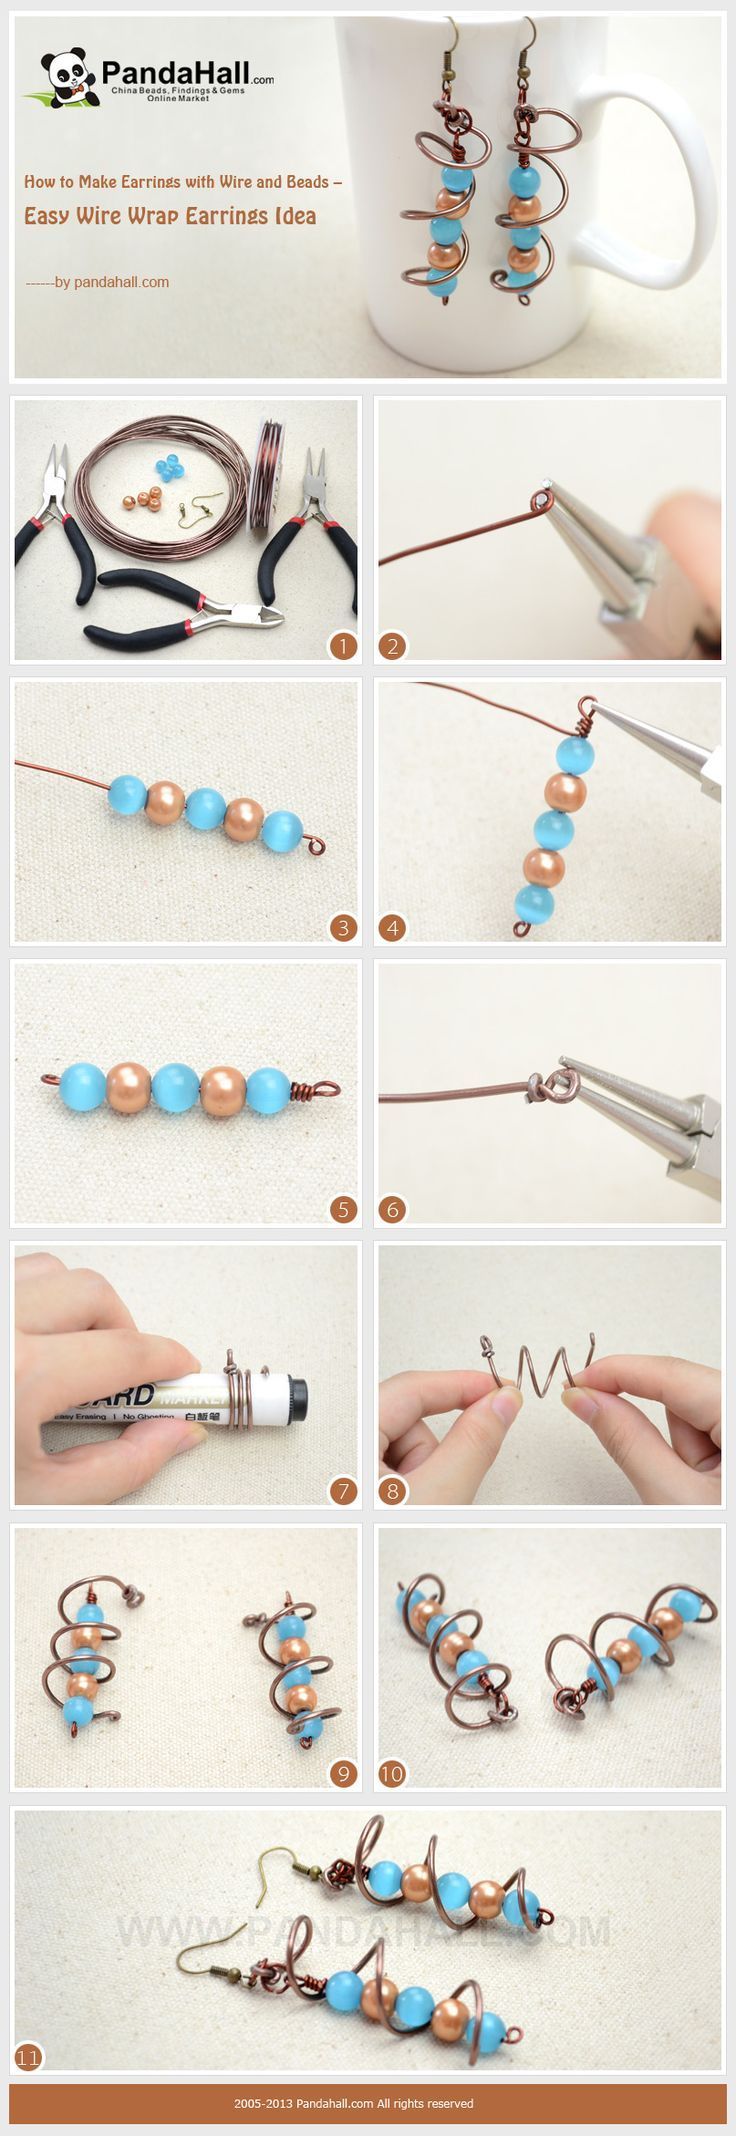 How to Make Earrings with Wire and Beads -   Wire Wrap Earrings Ideas